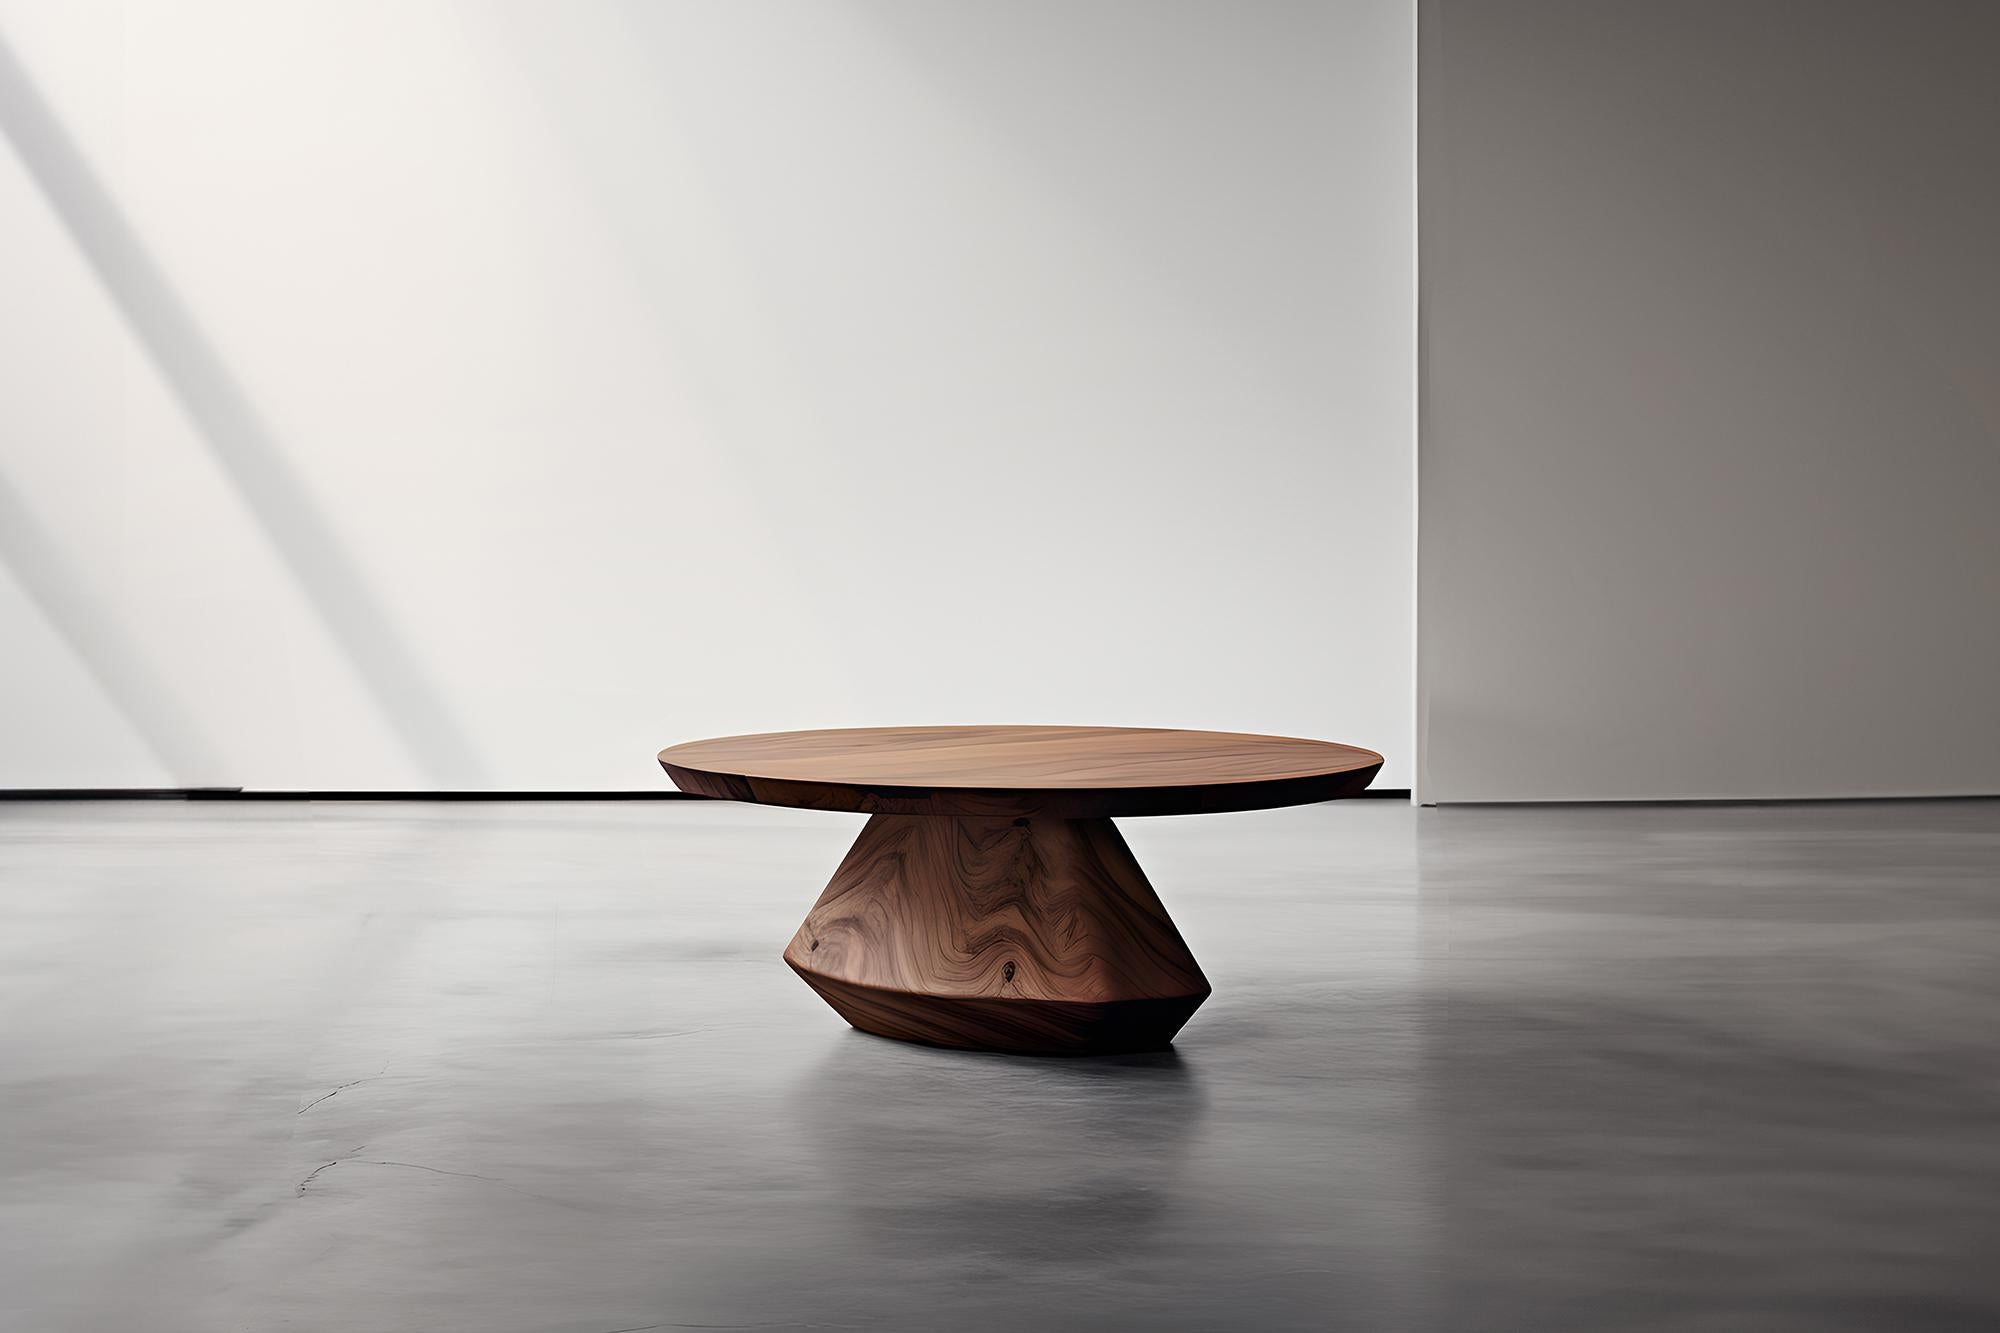 Sculptural Coffee Table Made of Solid Wood, Center Table Solace S34 by Joel Escalona


The Solace table series, designed by Joel Escalona, is a furniture collection that exudes balance and presence, thanks to its sensuous, dense, and irregular